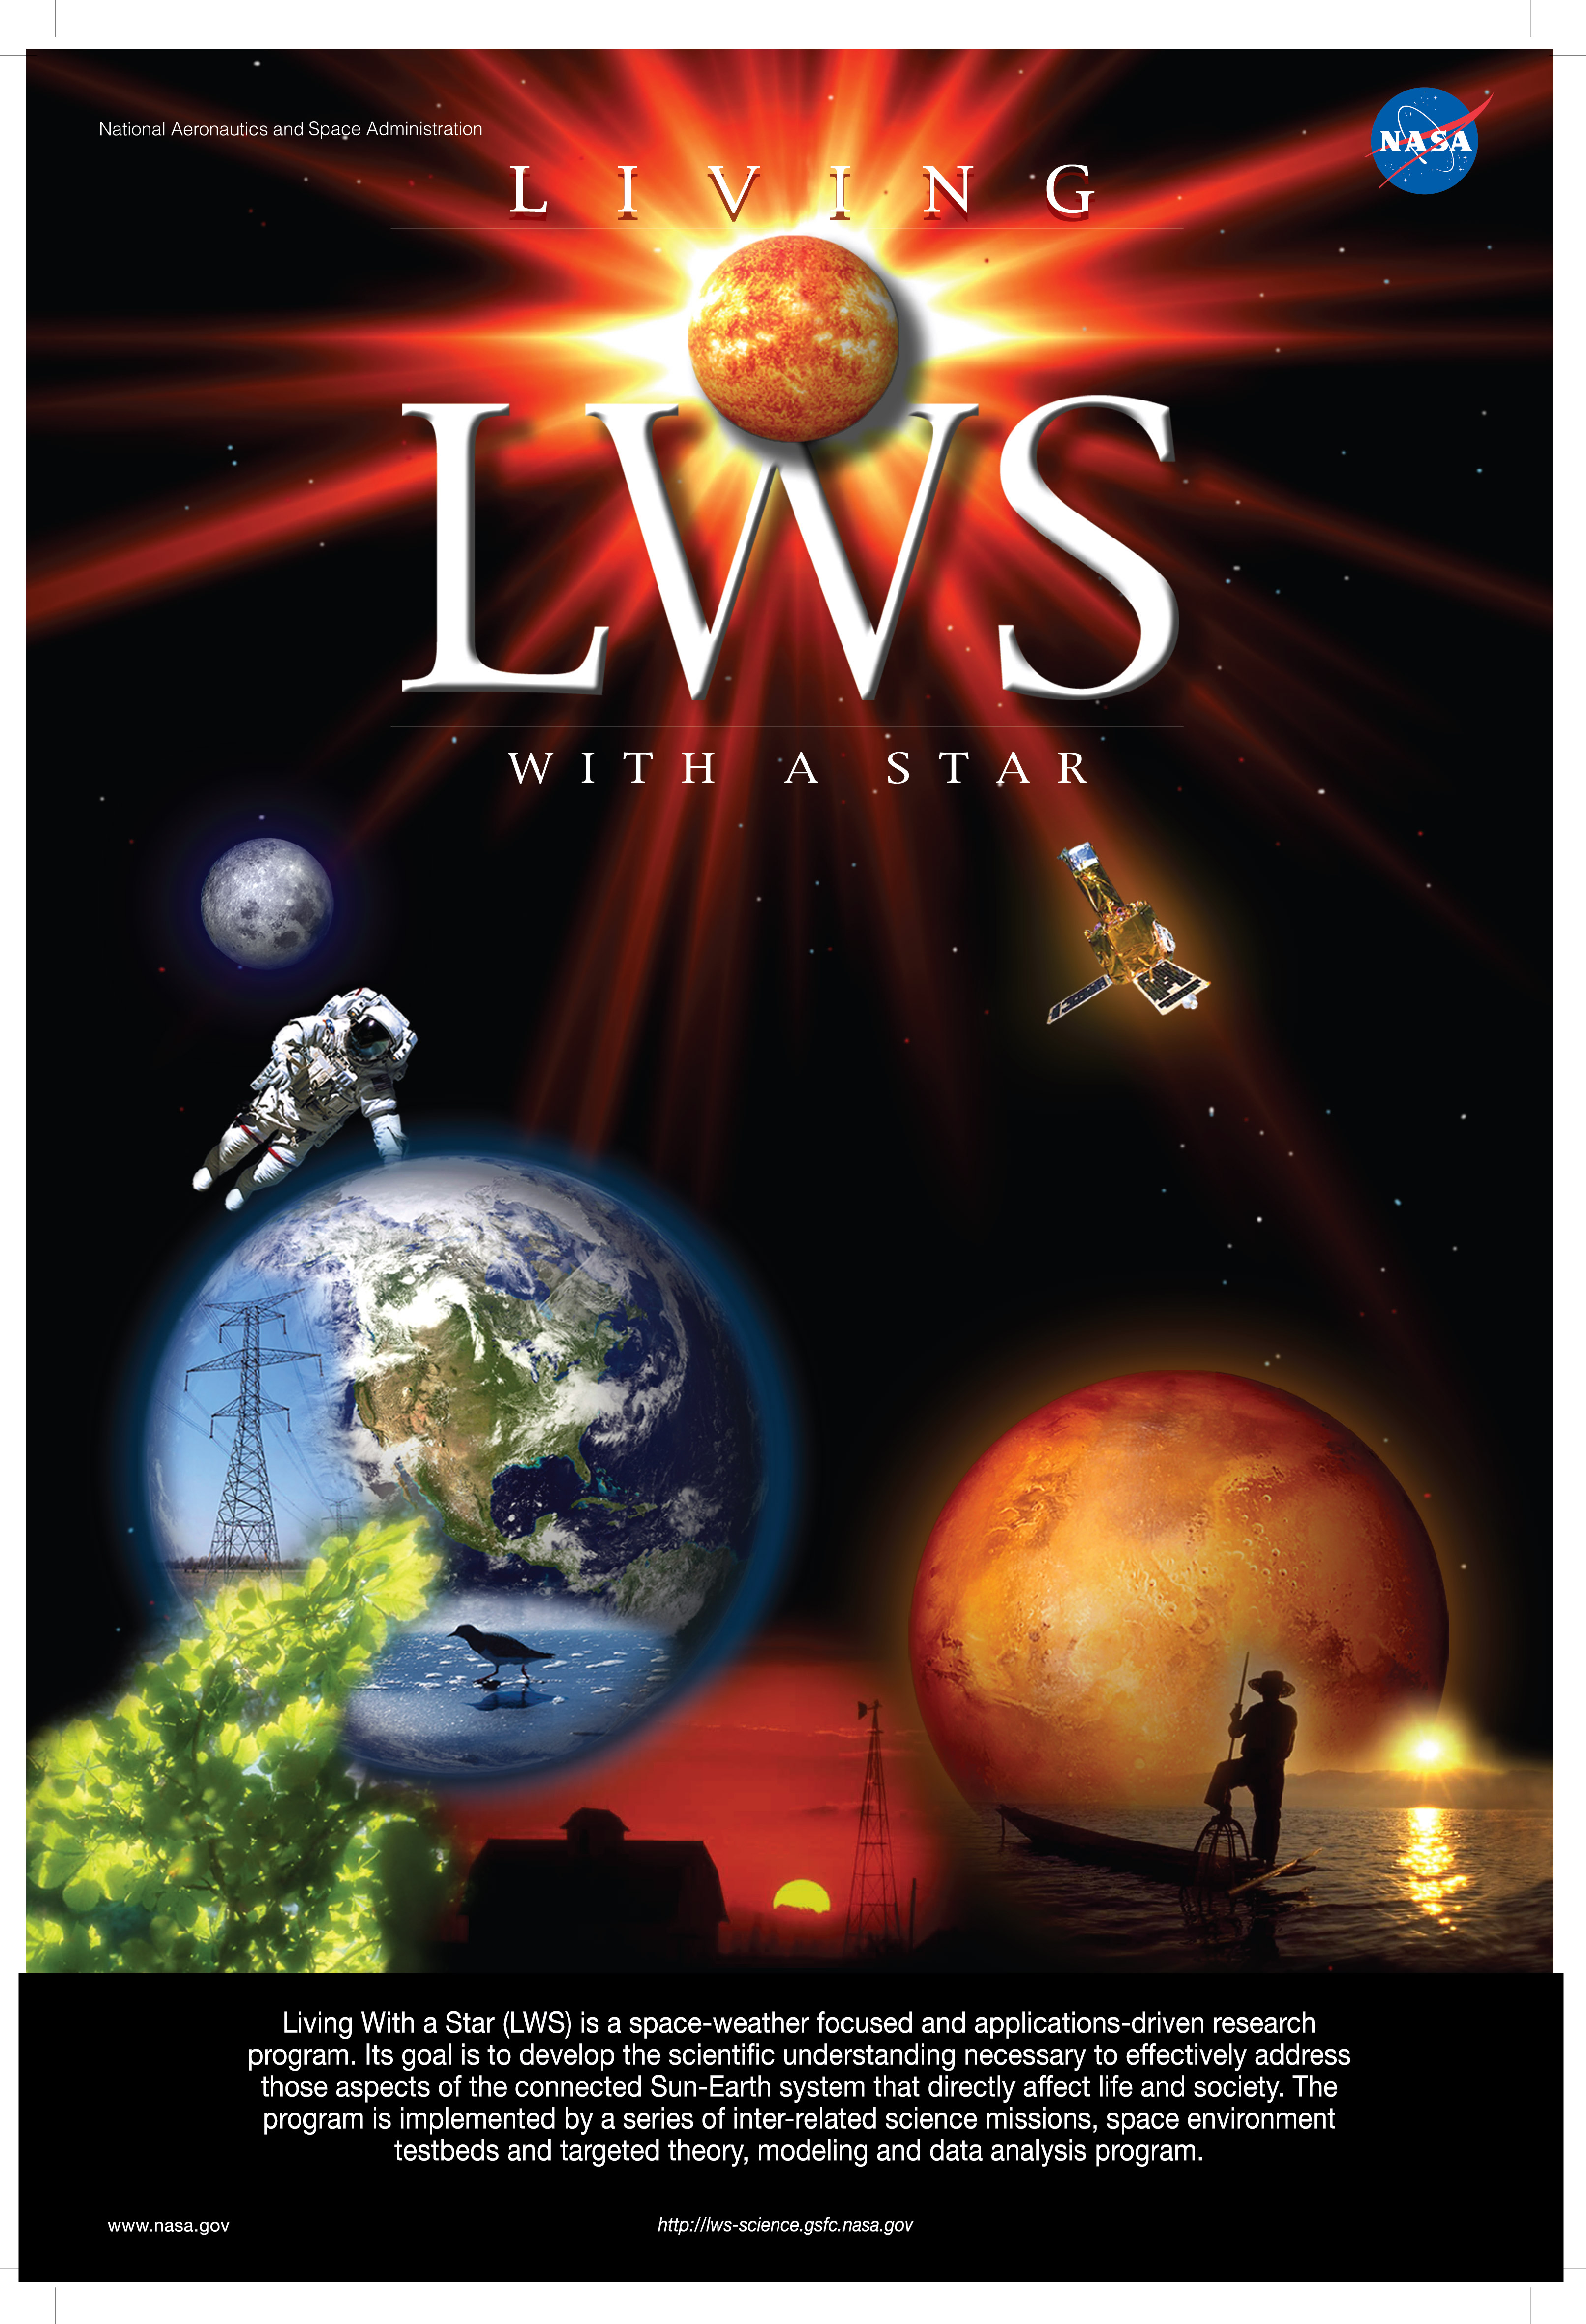 NASA's Living With a Star (LWS) program is a space-weather focused and applications driven research program. Its goal is to develop the scientific understanding necessary to effectively address those aspects of the connected sun-Earth system that directly affect life and society.  The program is implemented by a series of inter-related science missions, space environment testbeds, and a targeted theory, modeling, and data analysis program.  The Van Allen Probes are the second mission in the LWS program.  Credit: NASA